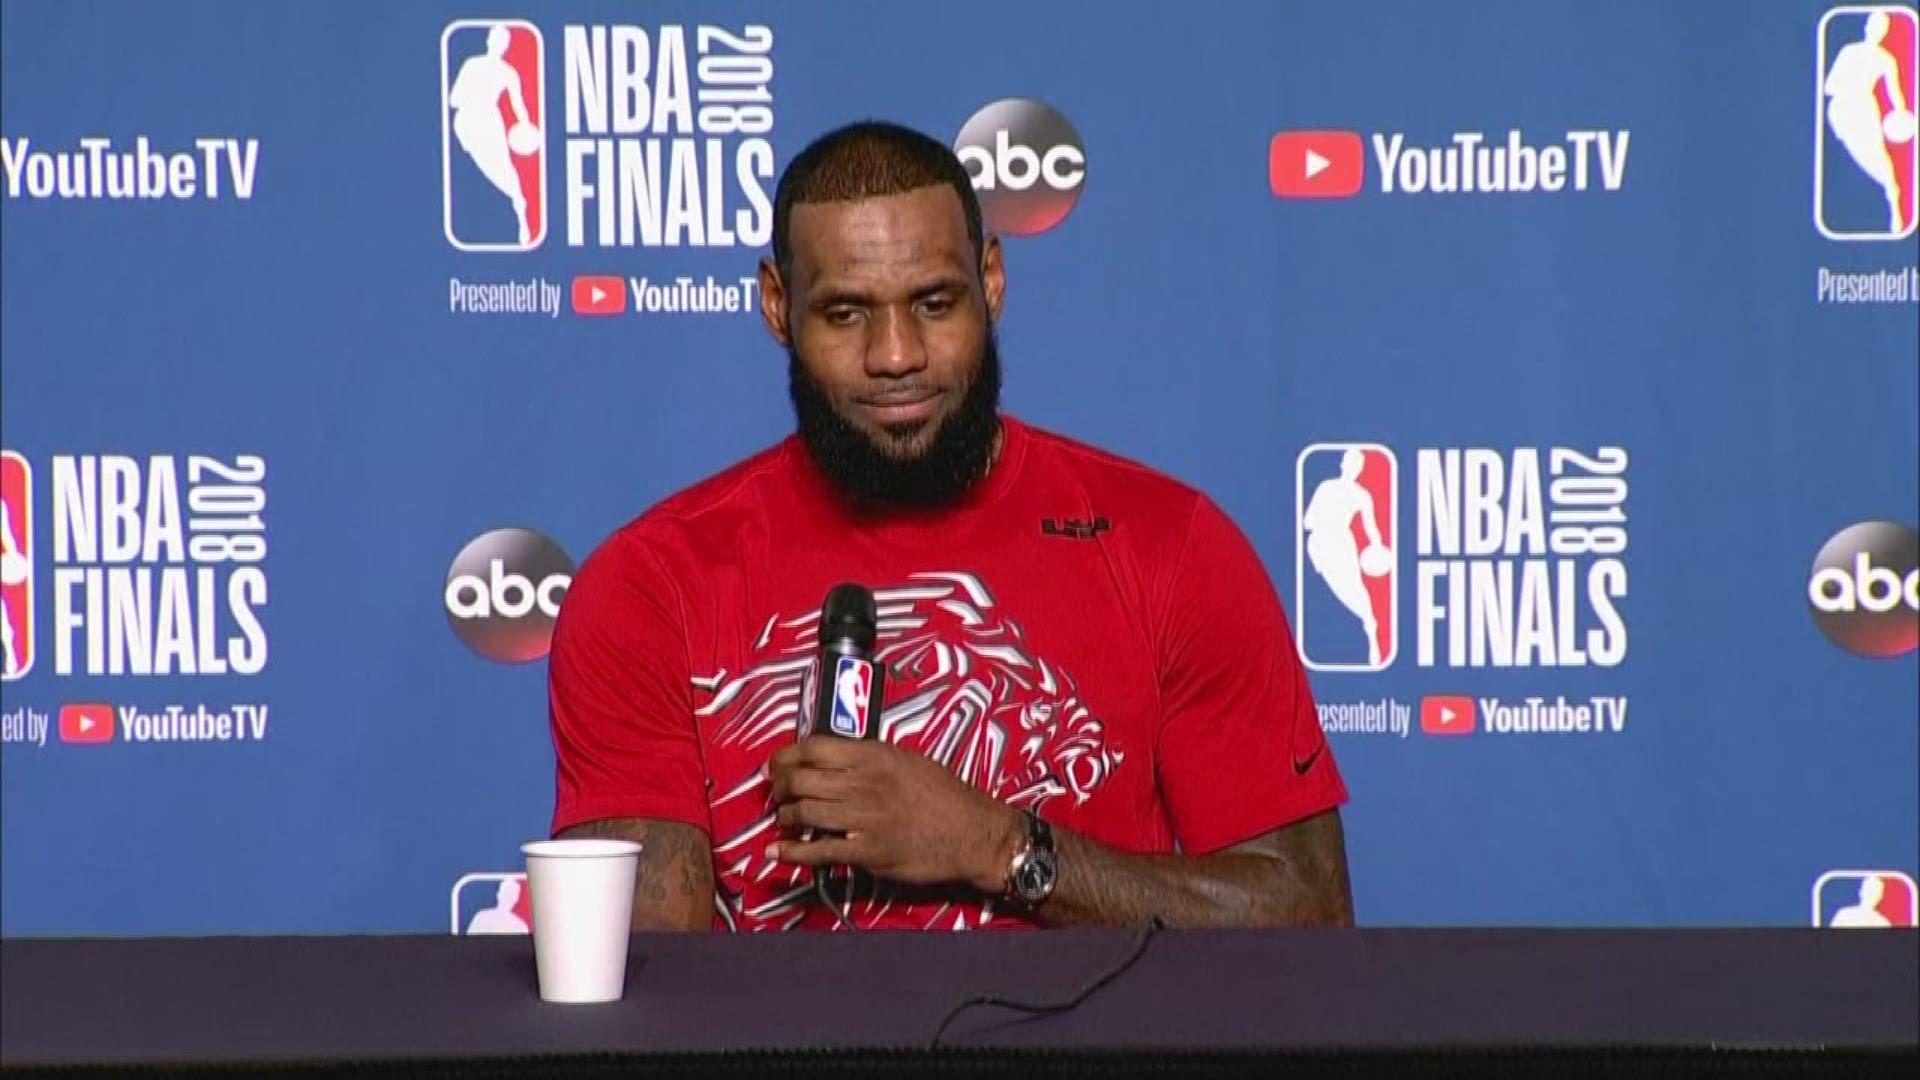 LeBron James says neither Cavaliers nor Warriors will visit White House